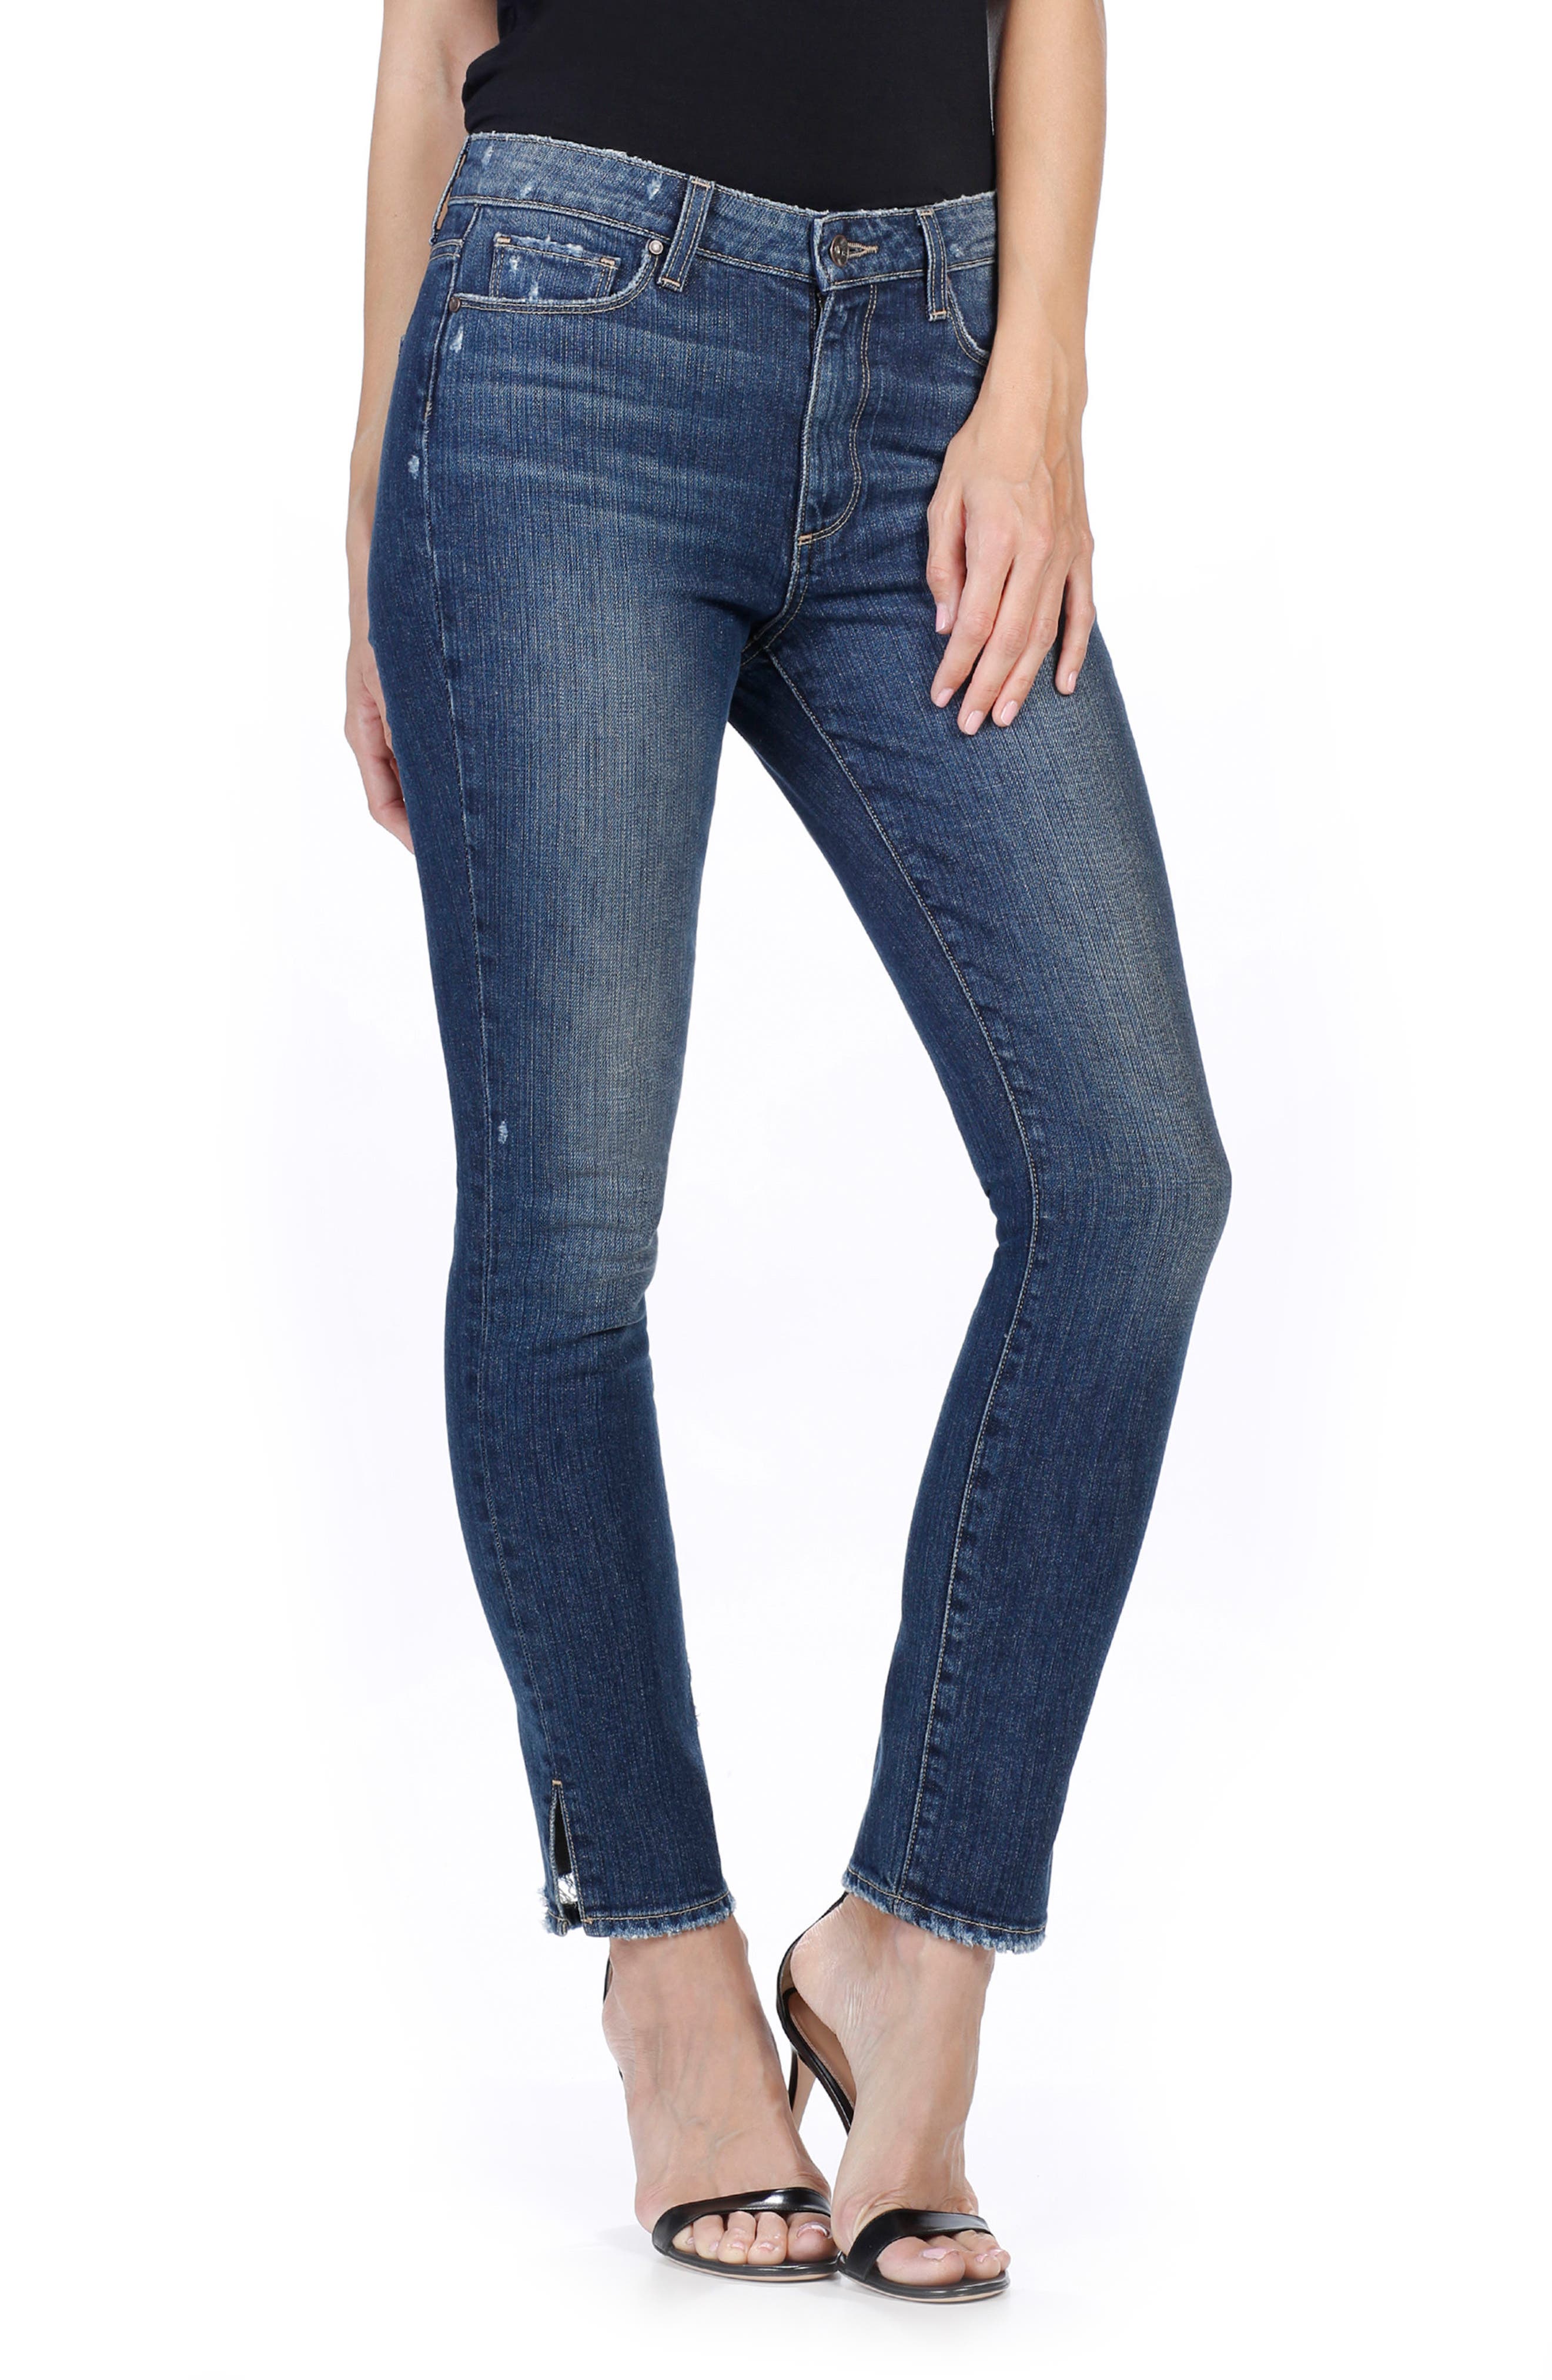 paige hoxton ankle peg high rise ankle skinny